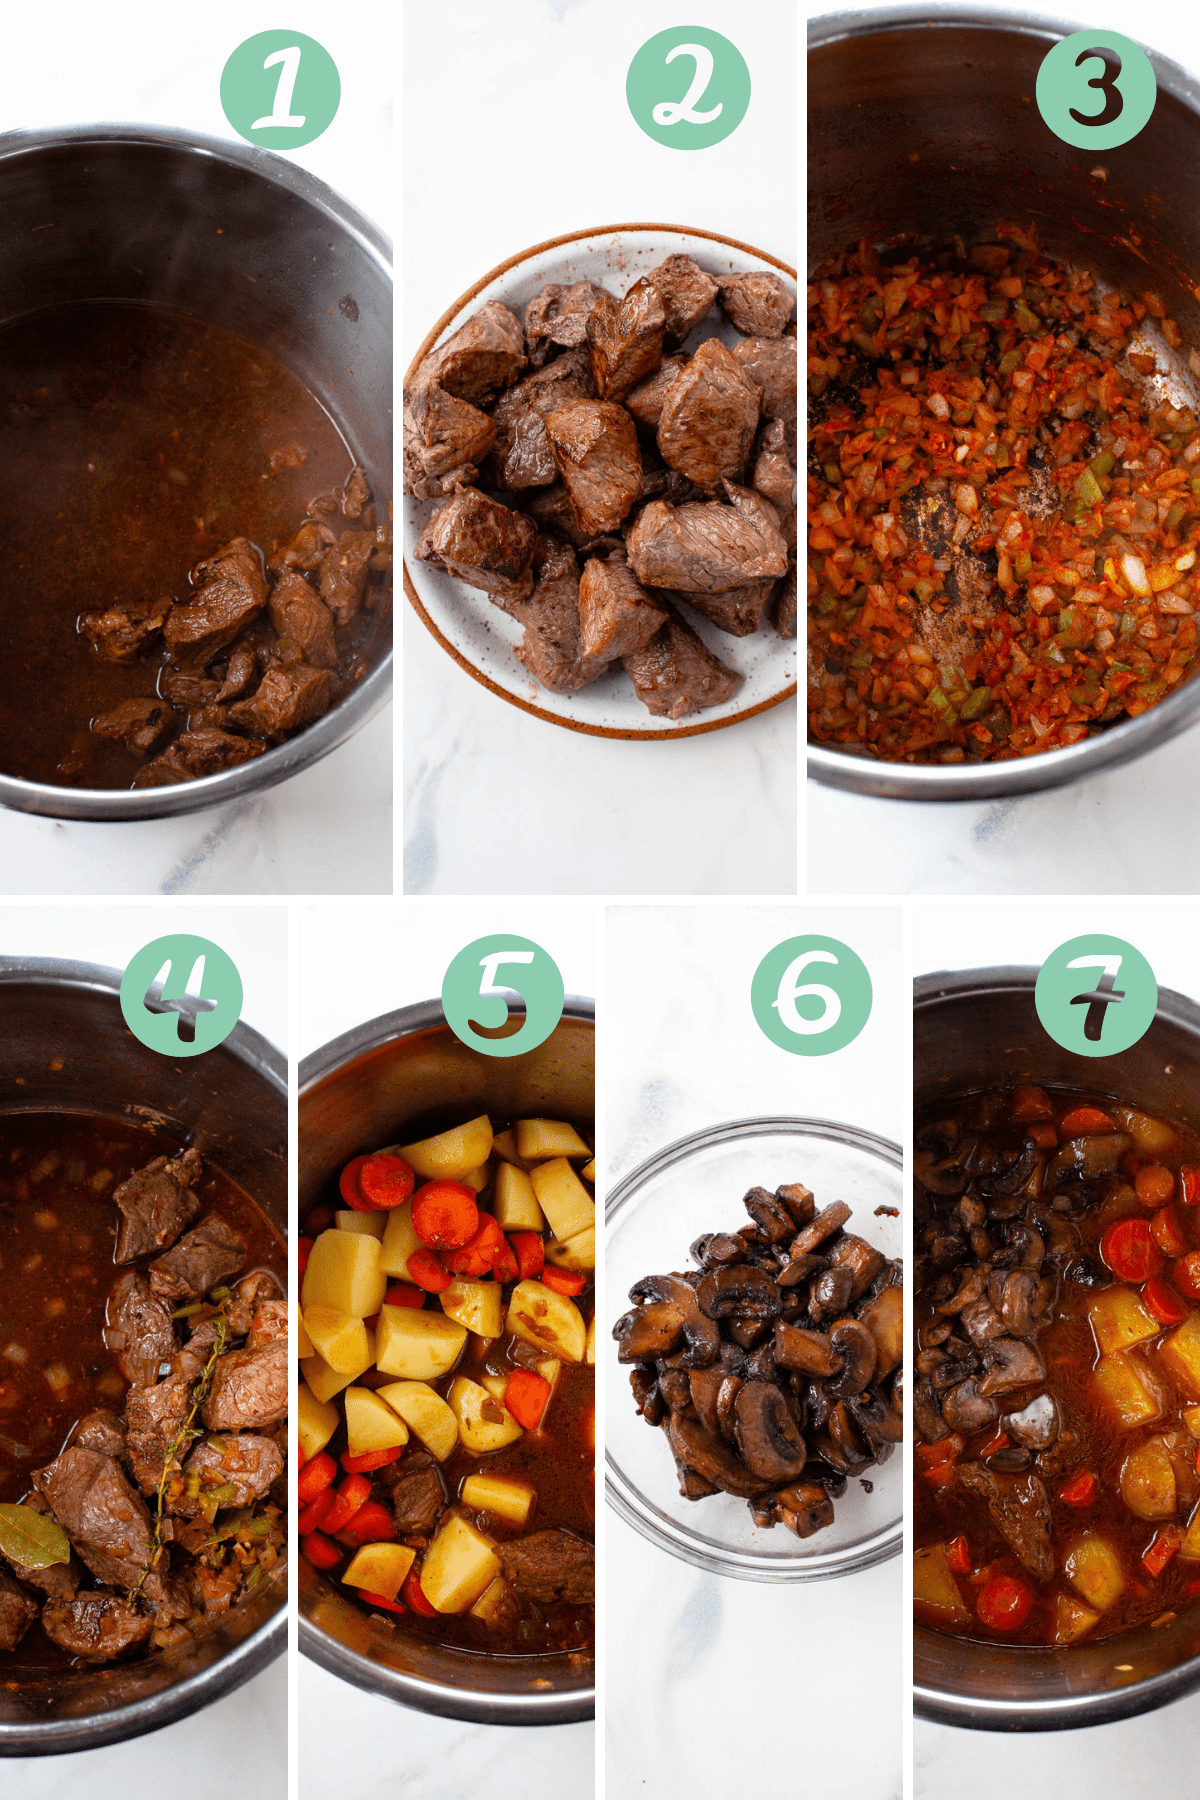 7 step process to make instant pot guiness beef stew shown.